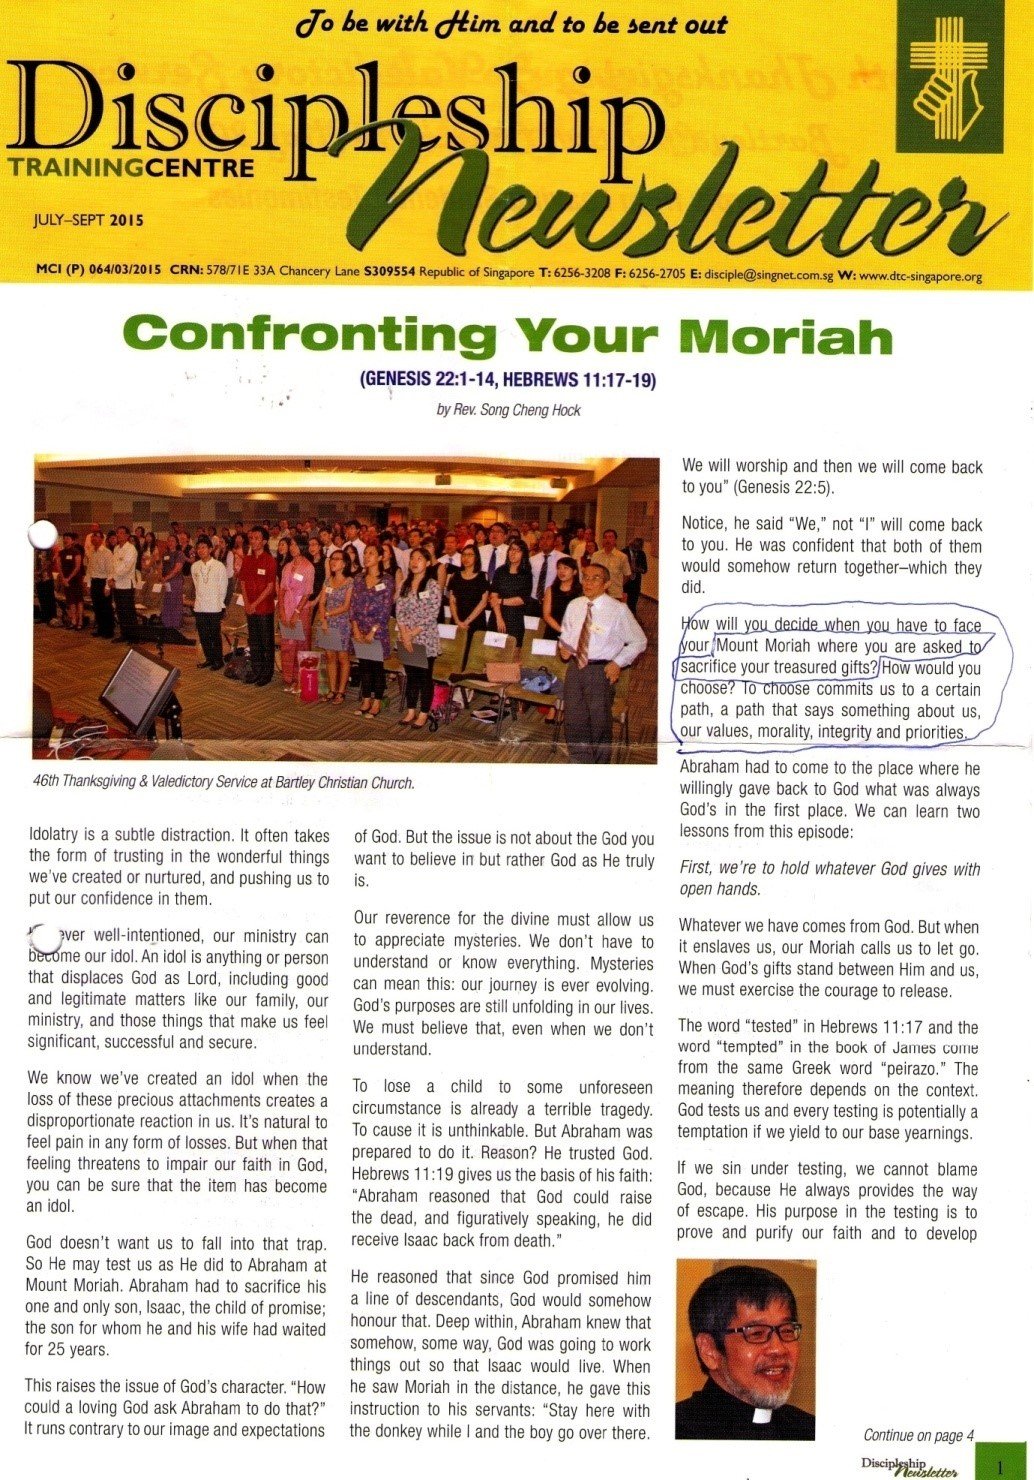 Confronting Your Moriah